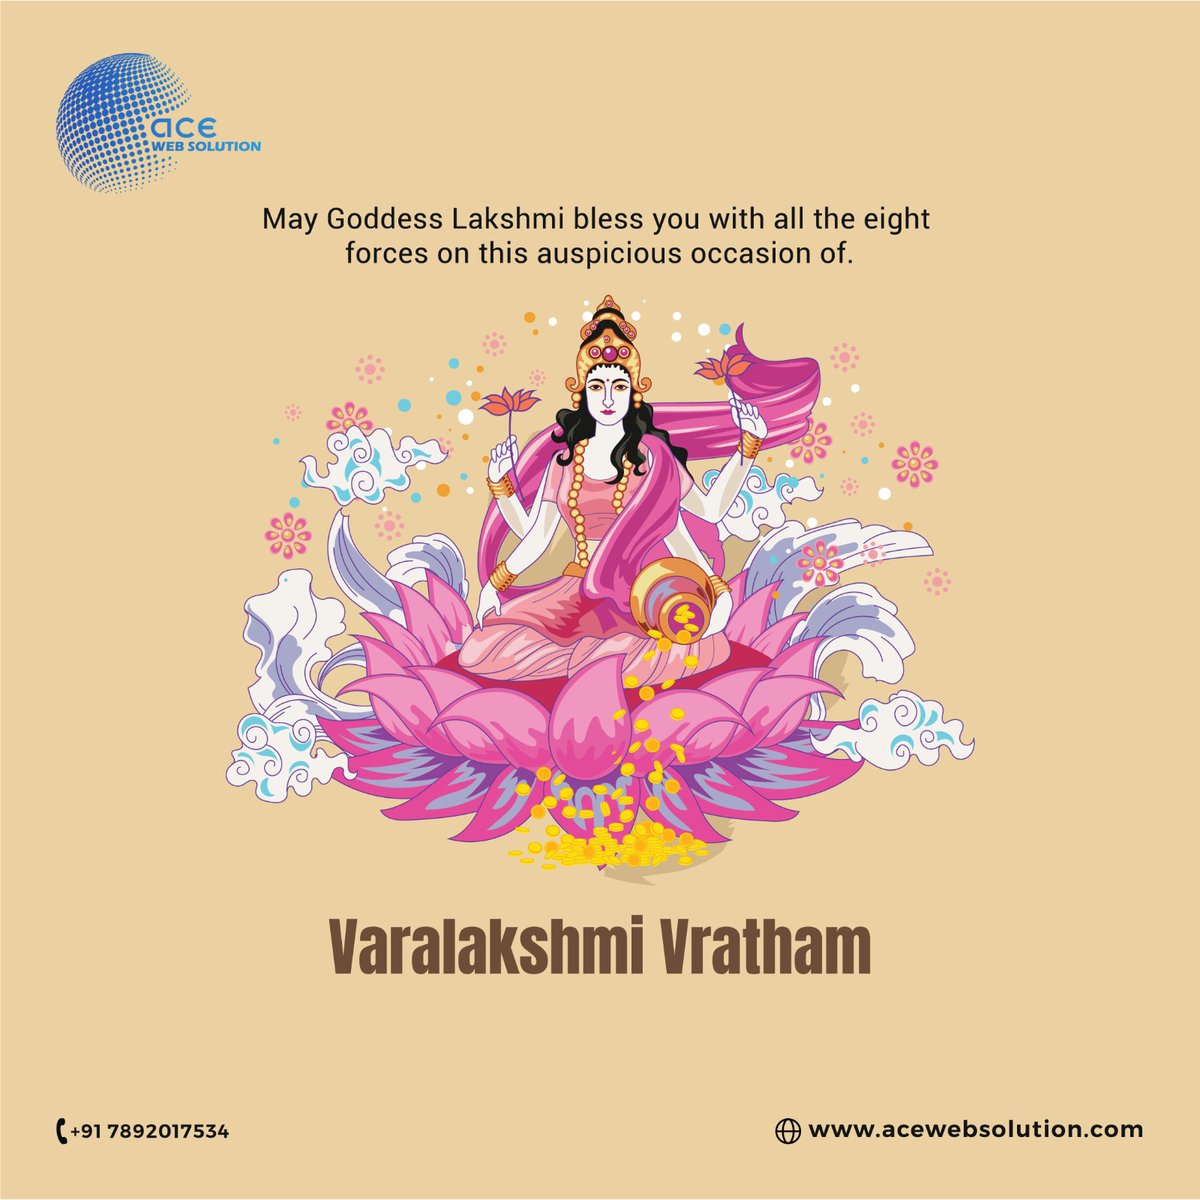 🌼 Happy Varalakshmi Day from Our Ace Web Solution 🌼

Sending you warm wishes on this special occasion - Varalakshmi Day!
May this day be filled with joy and positivity.

Wishing you a Happy Varalakshmi Day!

#HappyVaralakshmiDay #BlessingsAndProsperity #GoddessVaralakshmi